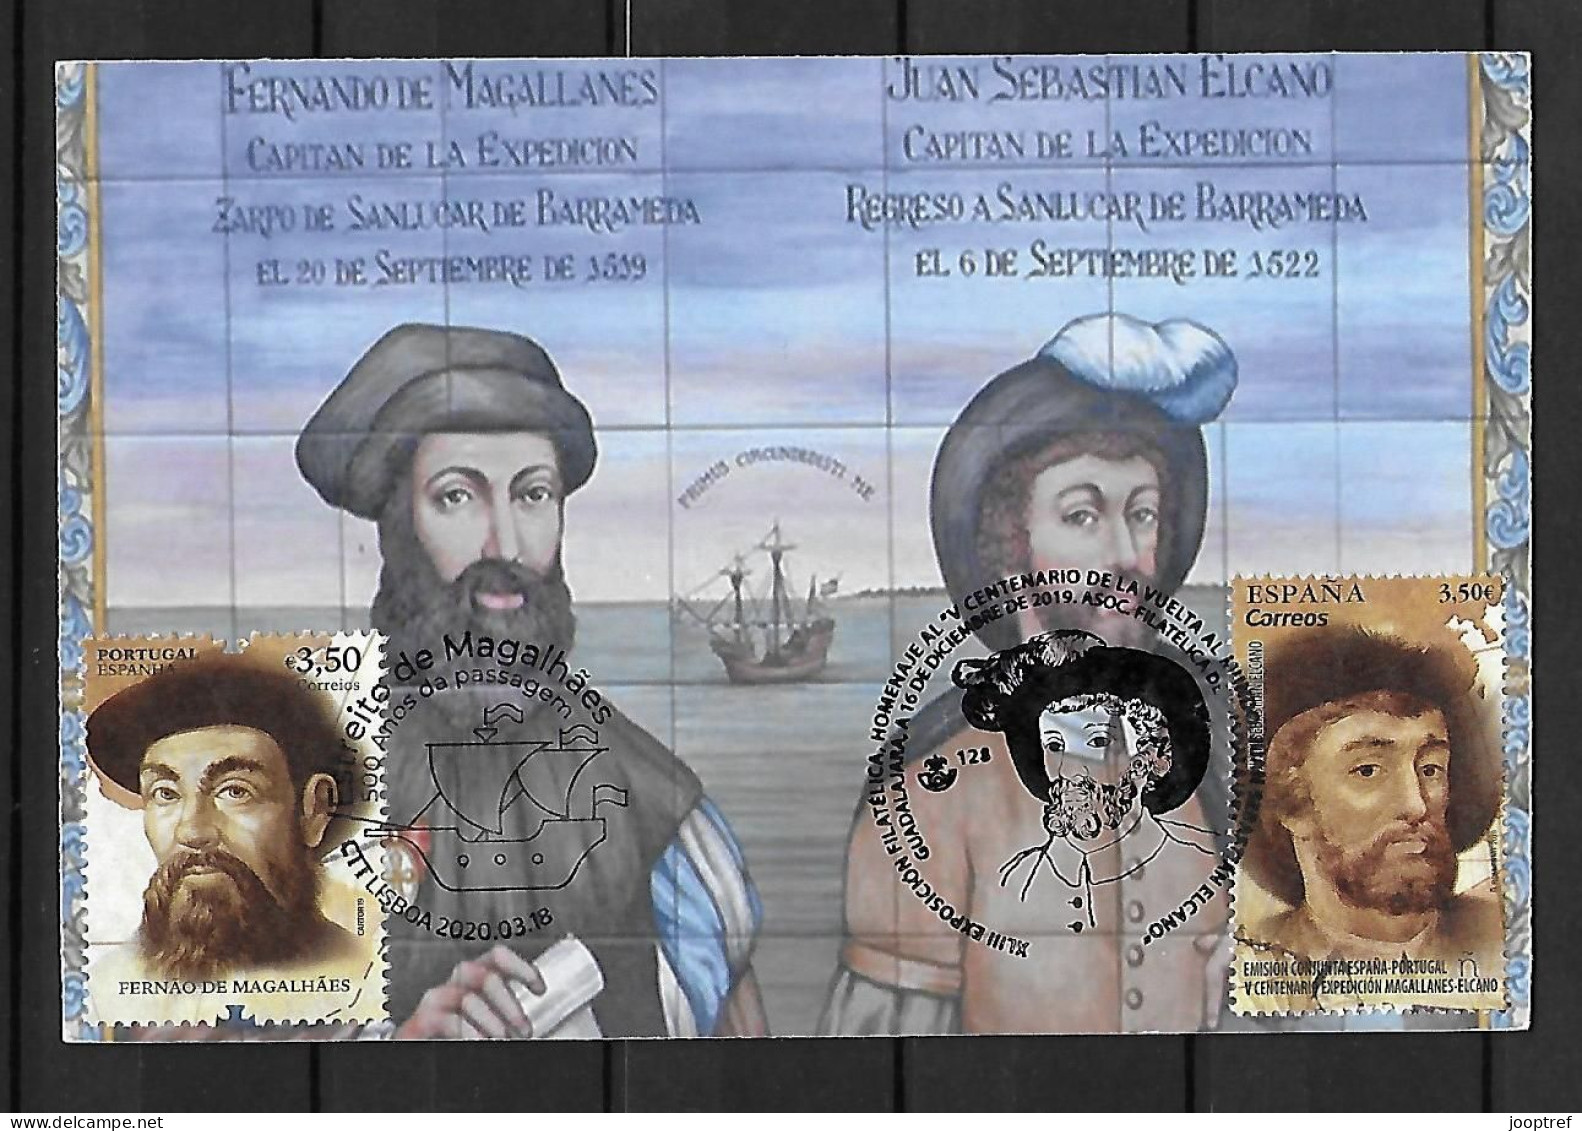 2019 Joint Portugal And Spain, MIXED FDC MAXIMUM CARD WITH BOTH STAMPS: 500 Years Magellan-Elcano Expedition - Emisiones Comunes